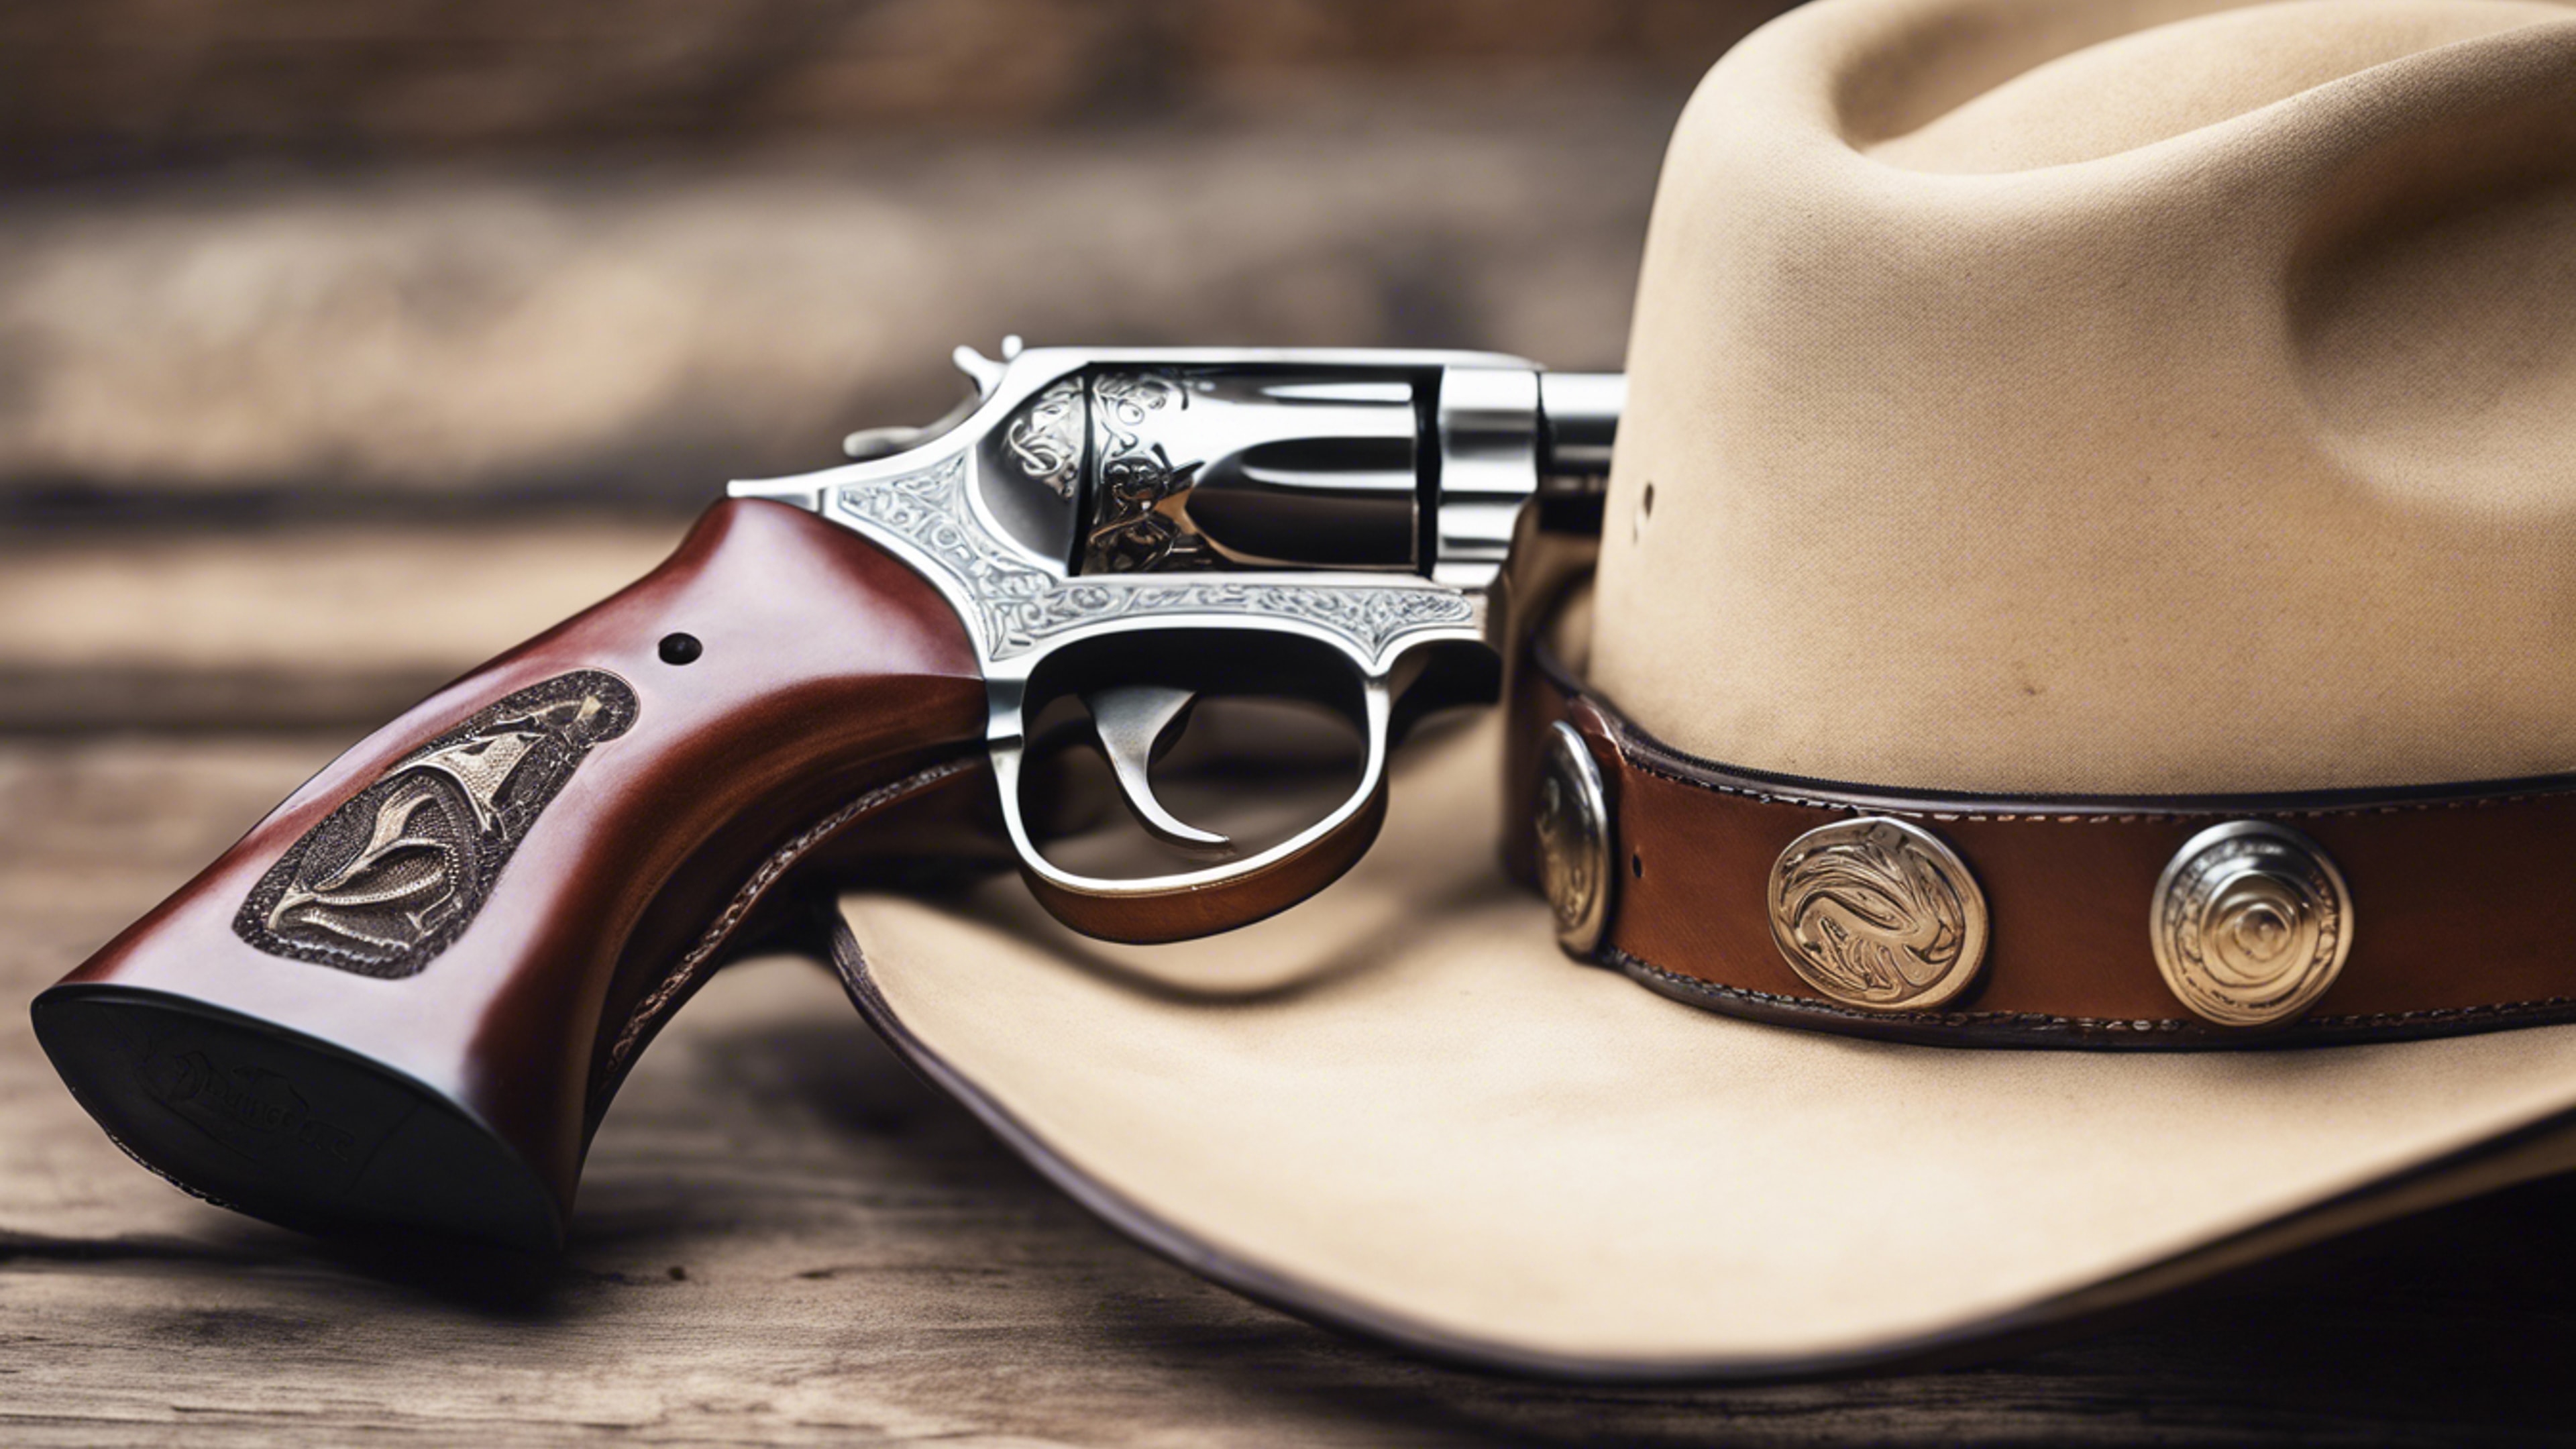 A detailed close-up of a cowboy hat, spurs, and a leather holster with a revolver. Papel de parede[6dbcb72083d24ad78673]